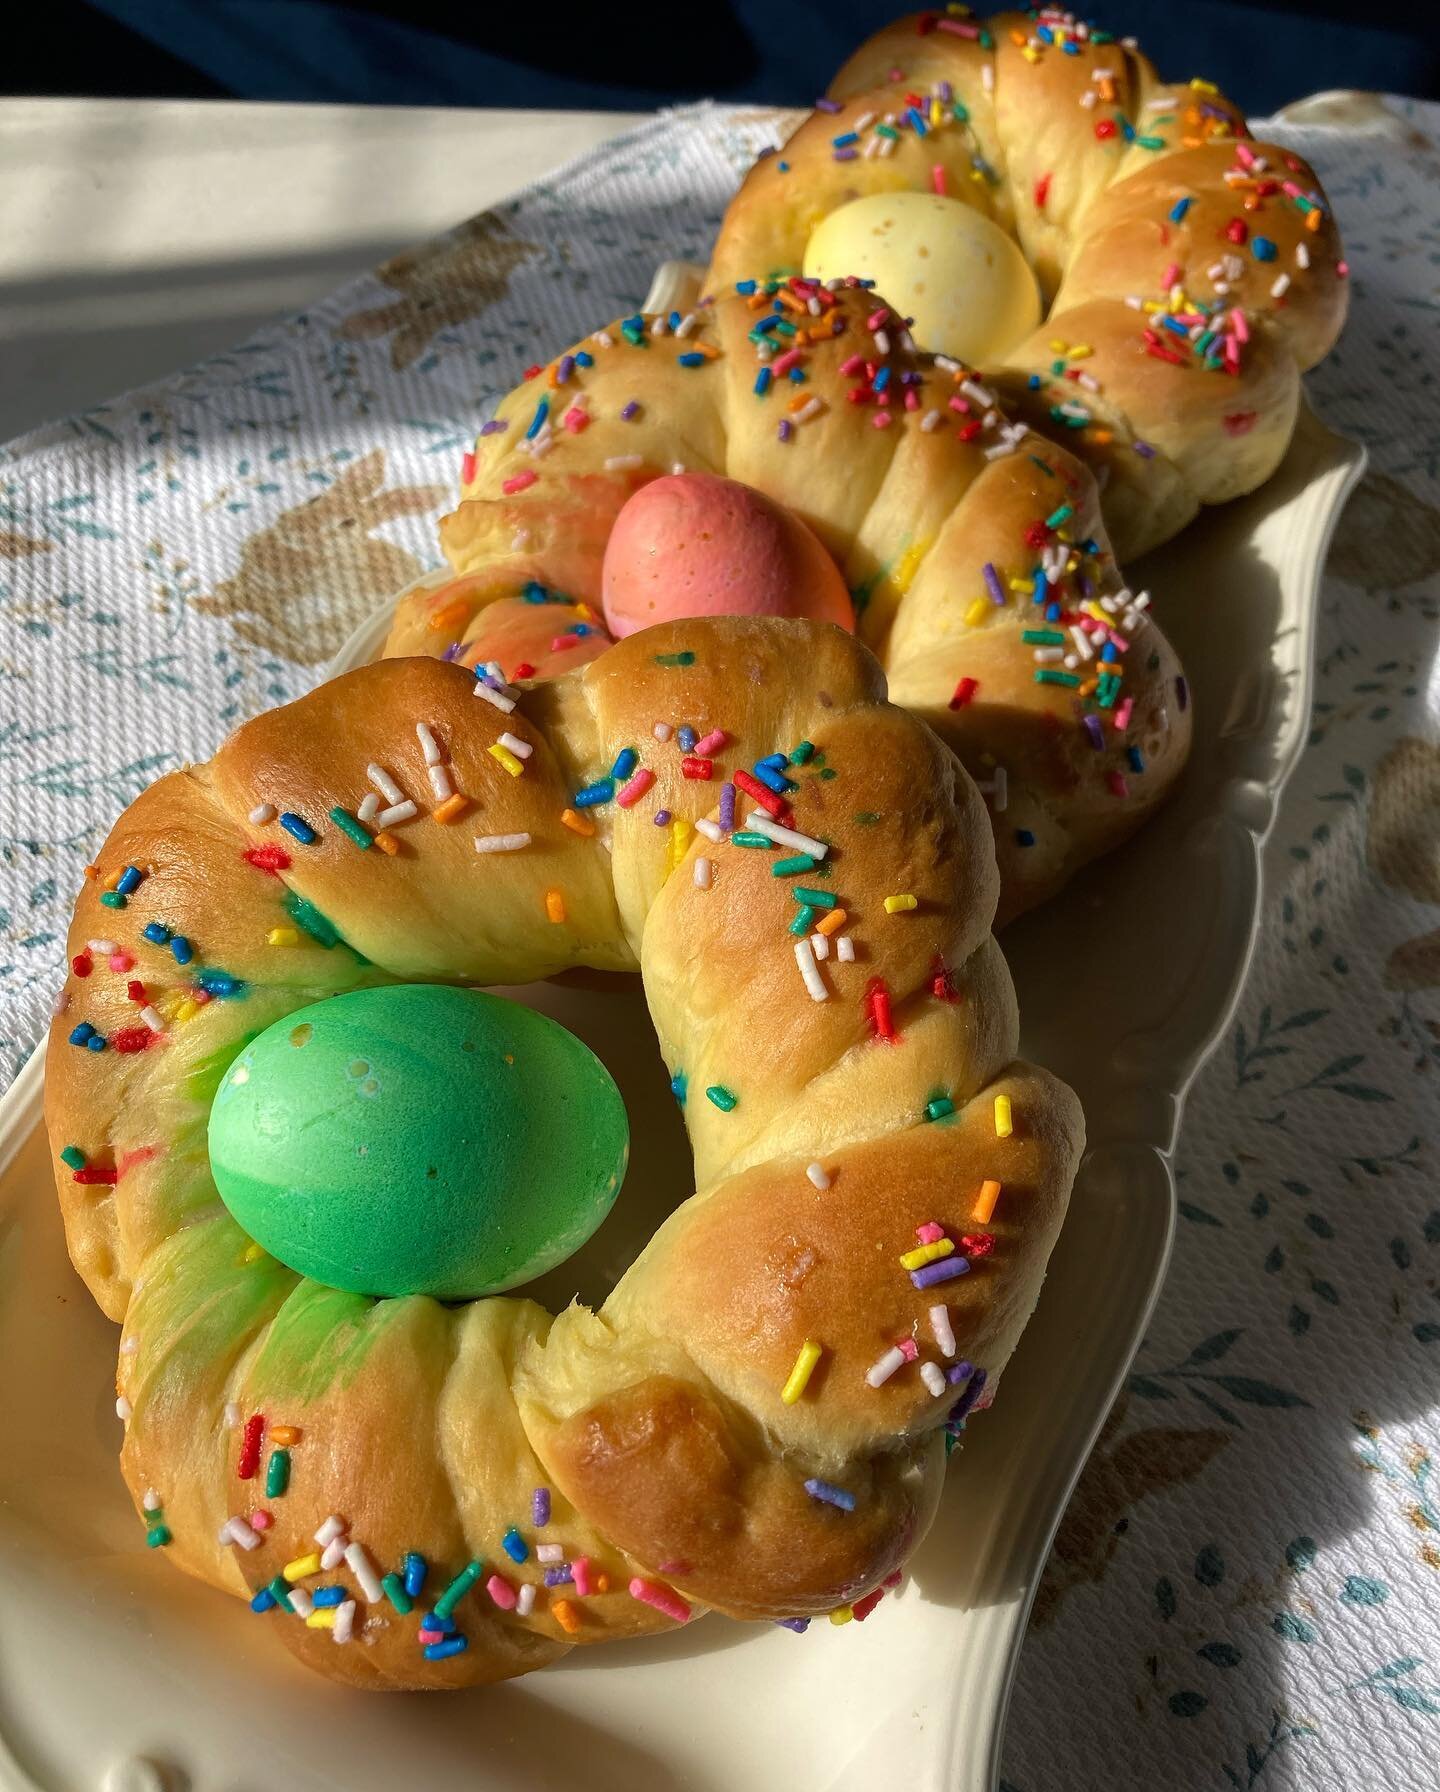 Pane di Pasqua 🥖🥚

Pane di Pasqua is sweet brioche bread, usually in the shape of a braided wreath, with sprinkles and colored eggs baked on top. 

Although this bread is delicious, it also holds significant meaning behind it. The bread is meant to